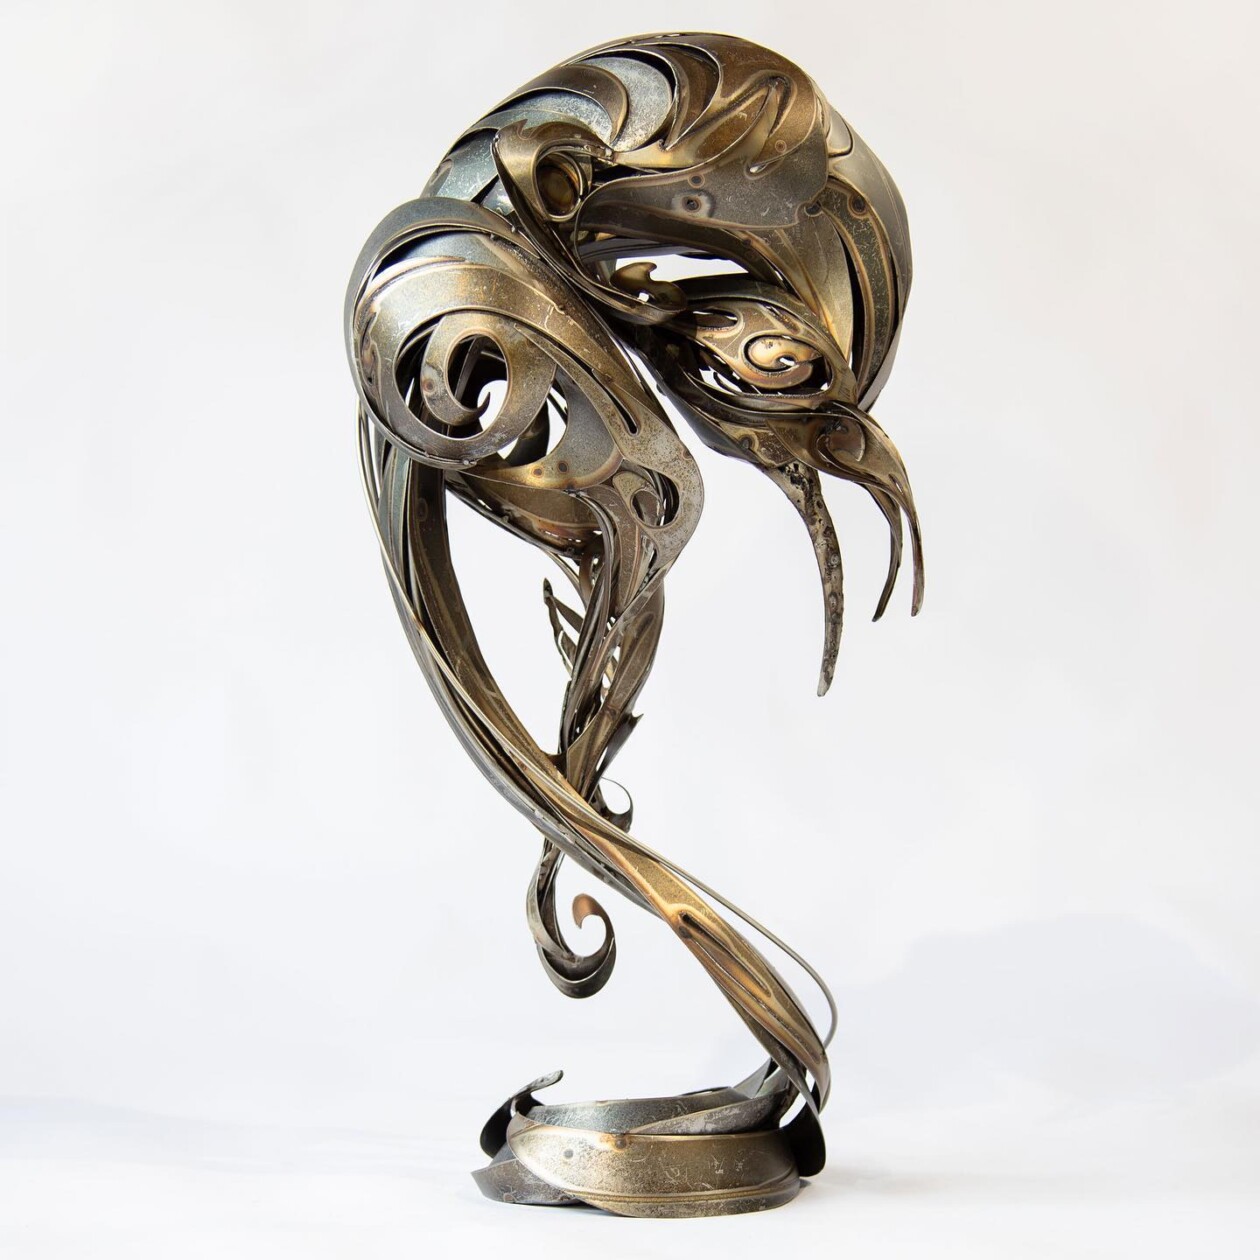 Magnificent Metallic Animal Sculptures Made With Sweeping Lines By Georgie Seccull (14)